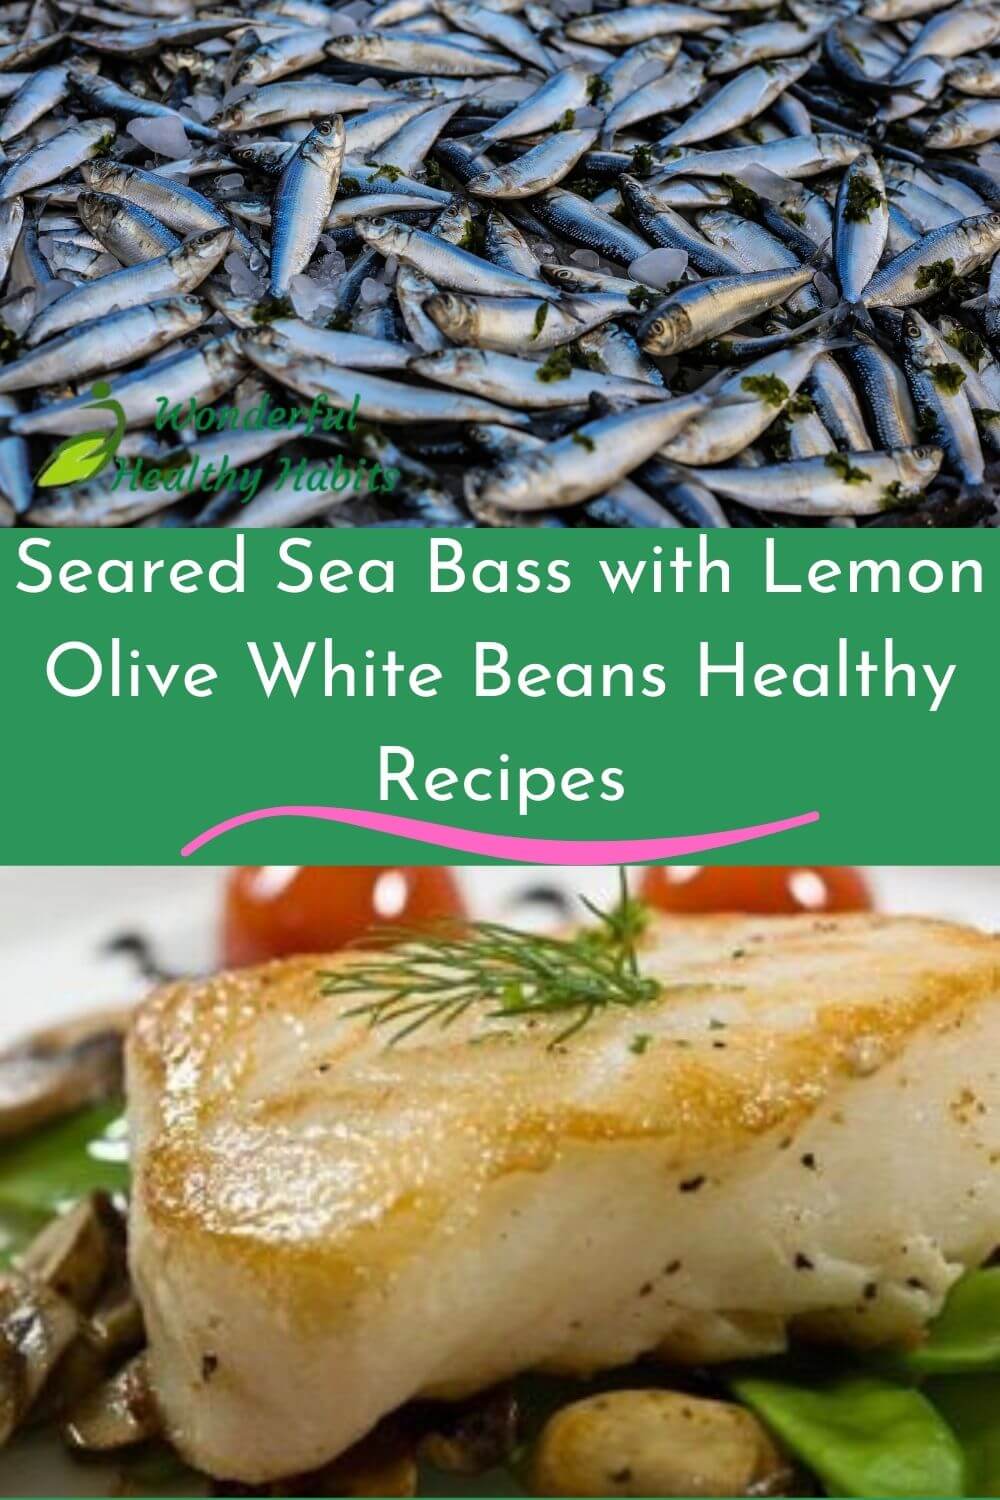 Seared Sea Bass with Lemon-Olive White Beans Healthy Recipes